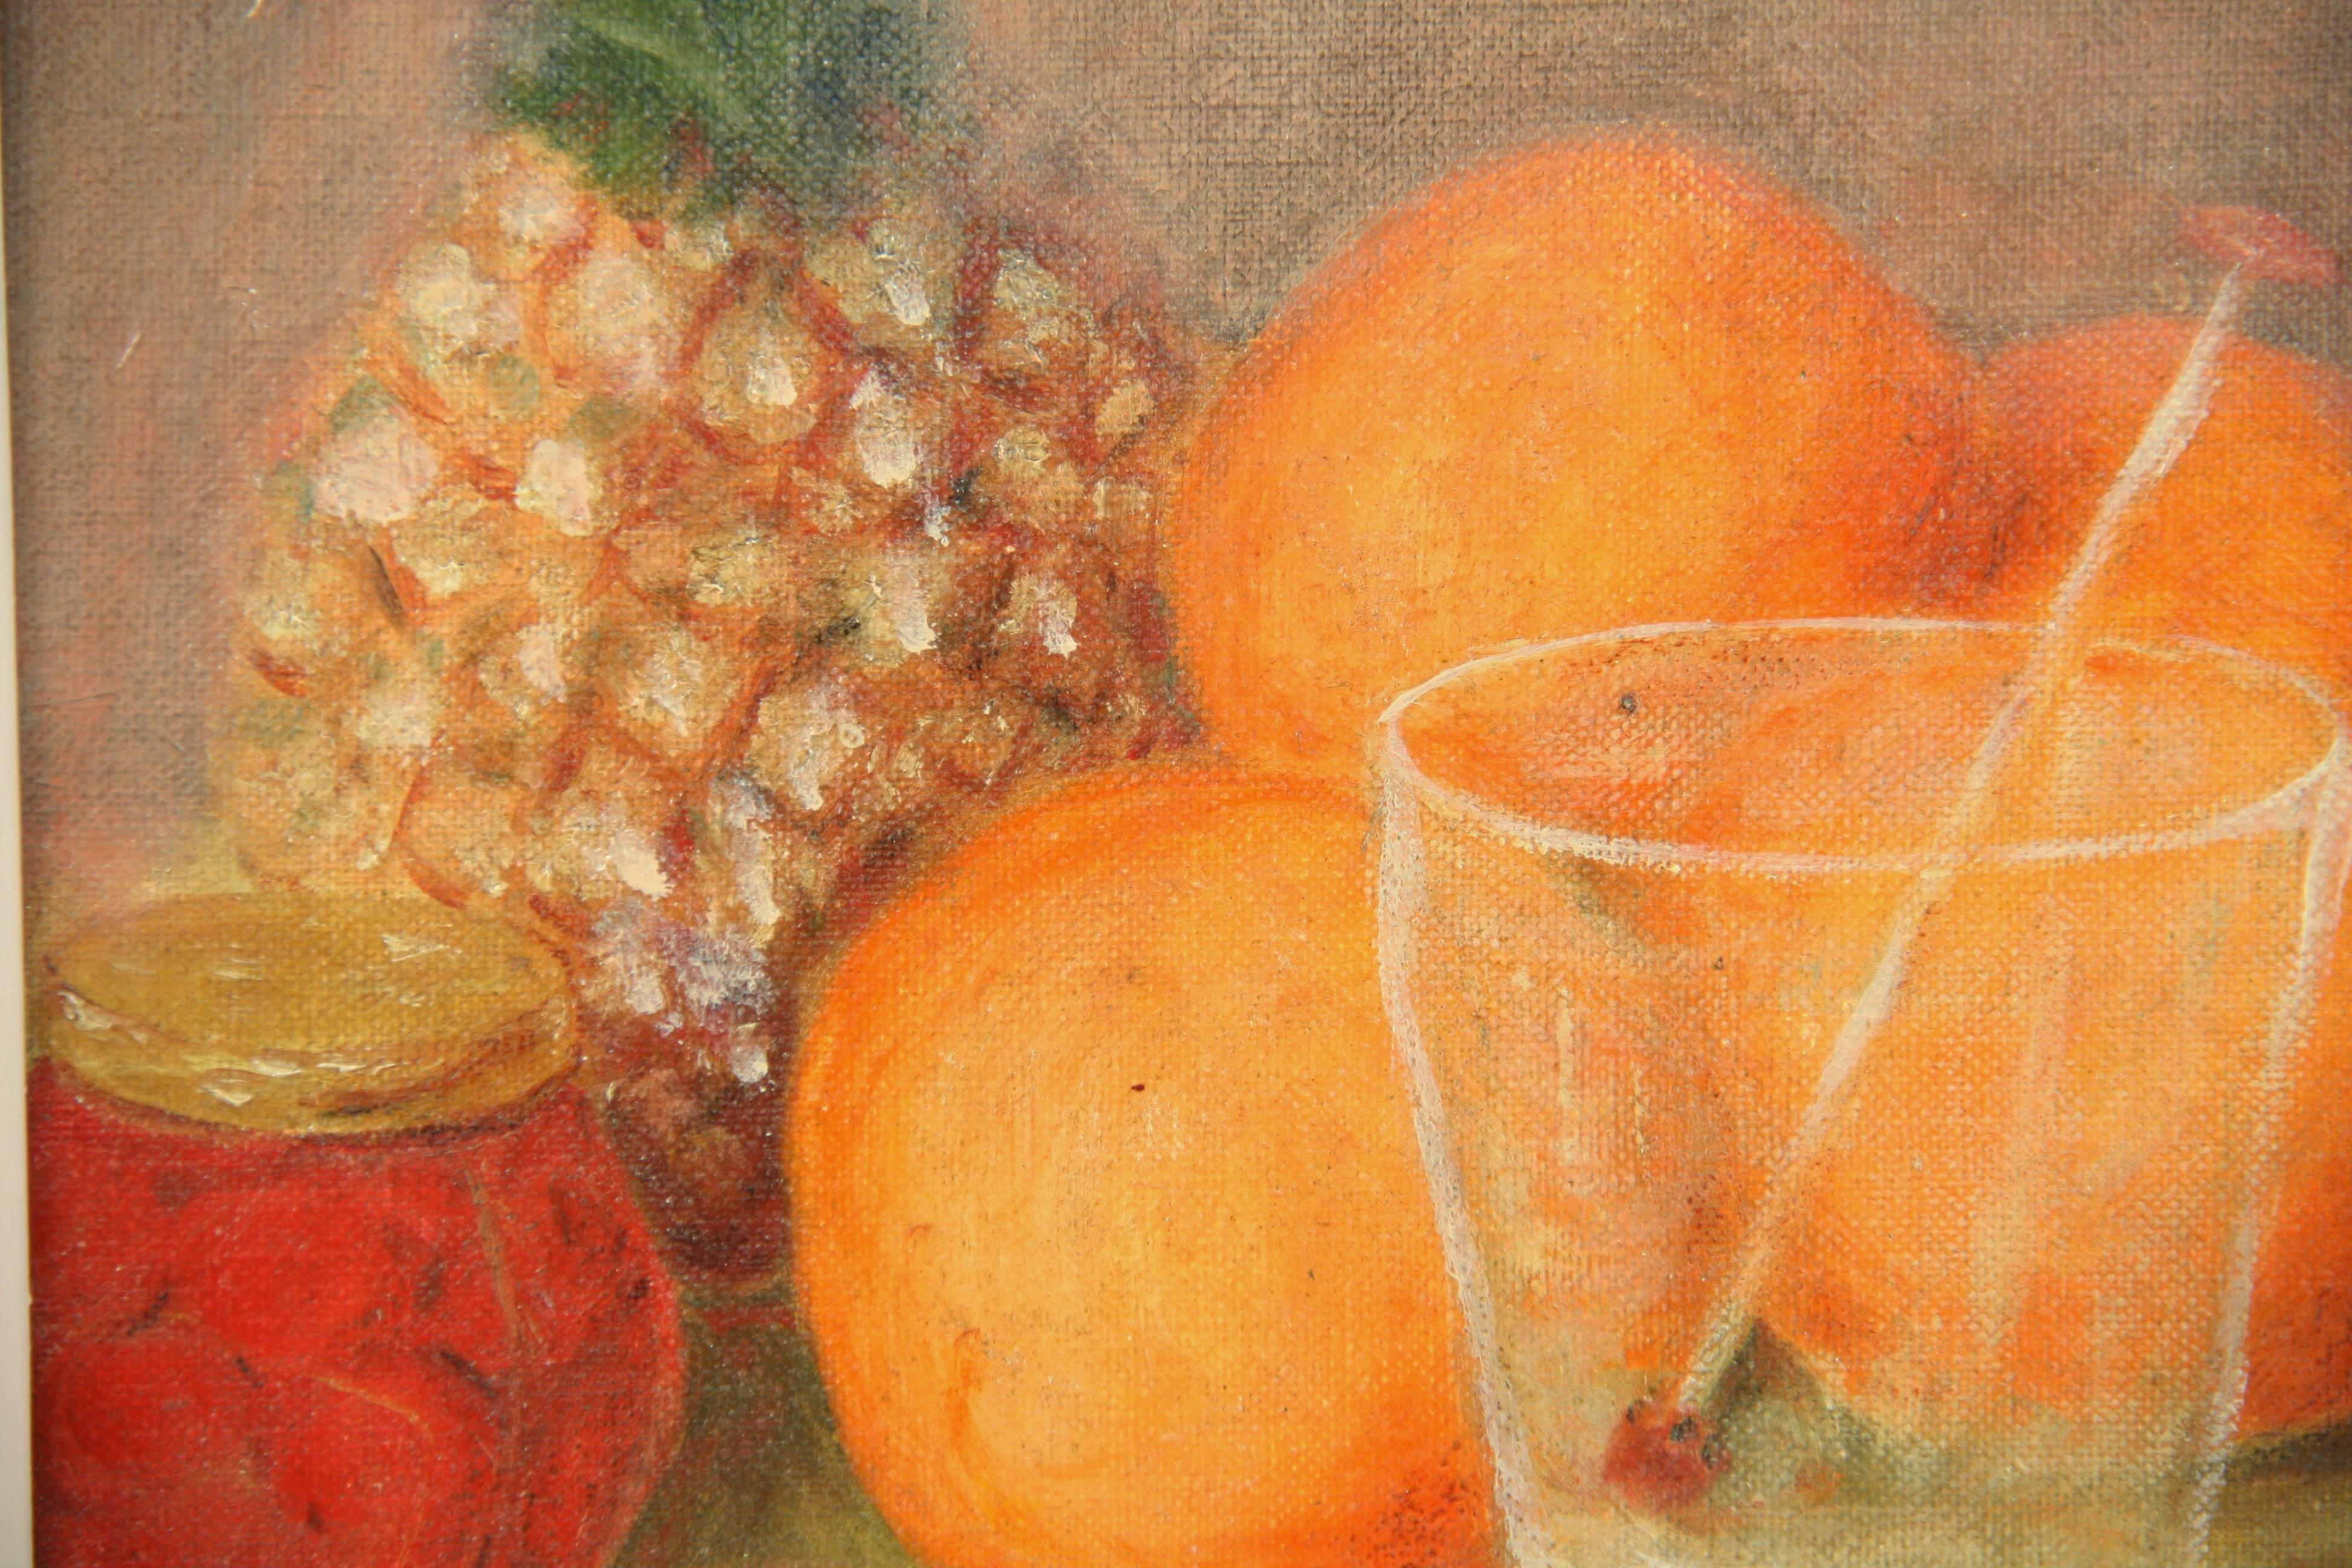 Vintage Tropical Pineapple and Oranges Still Life Painting For Sale 3